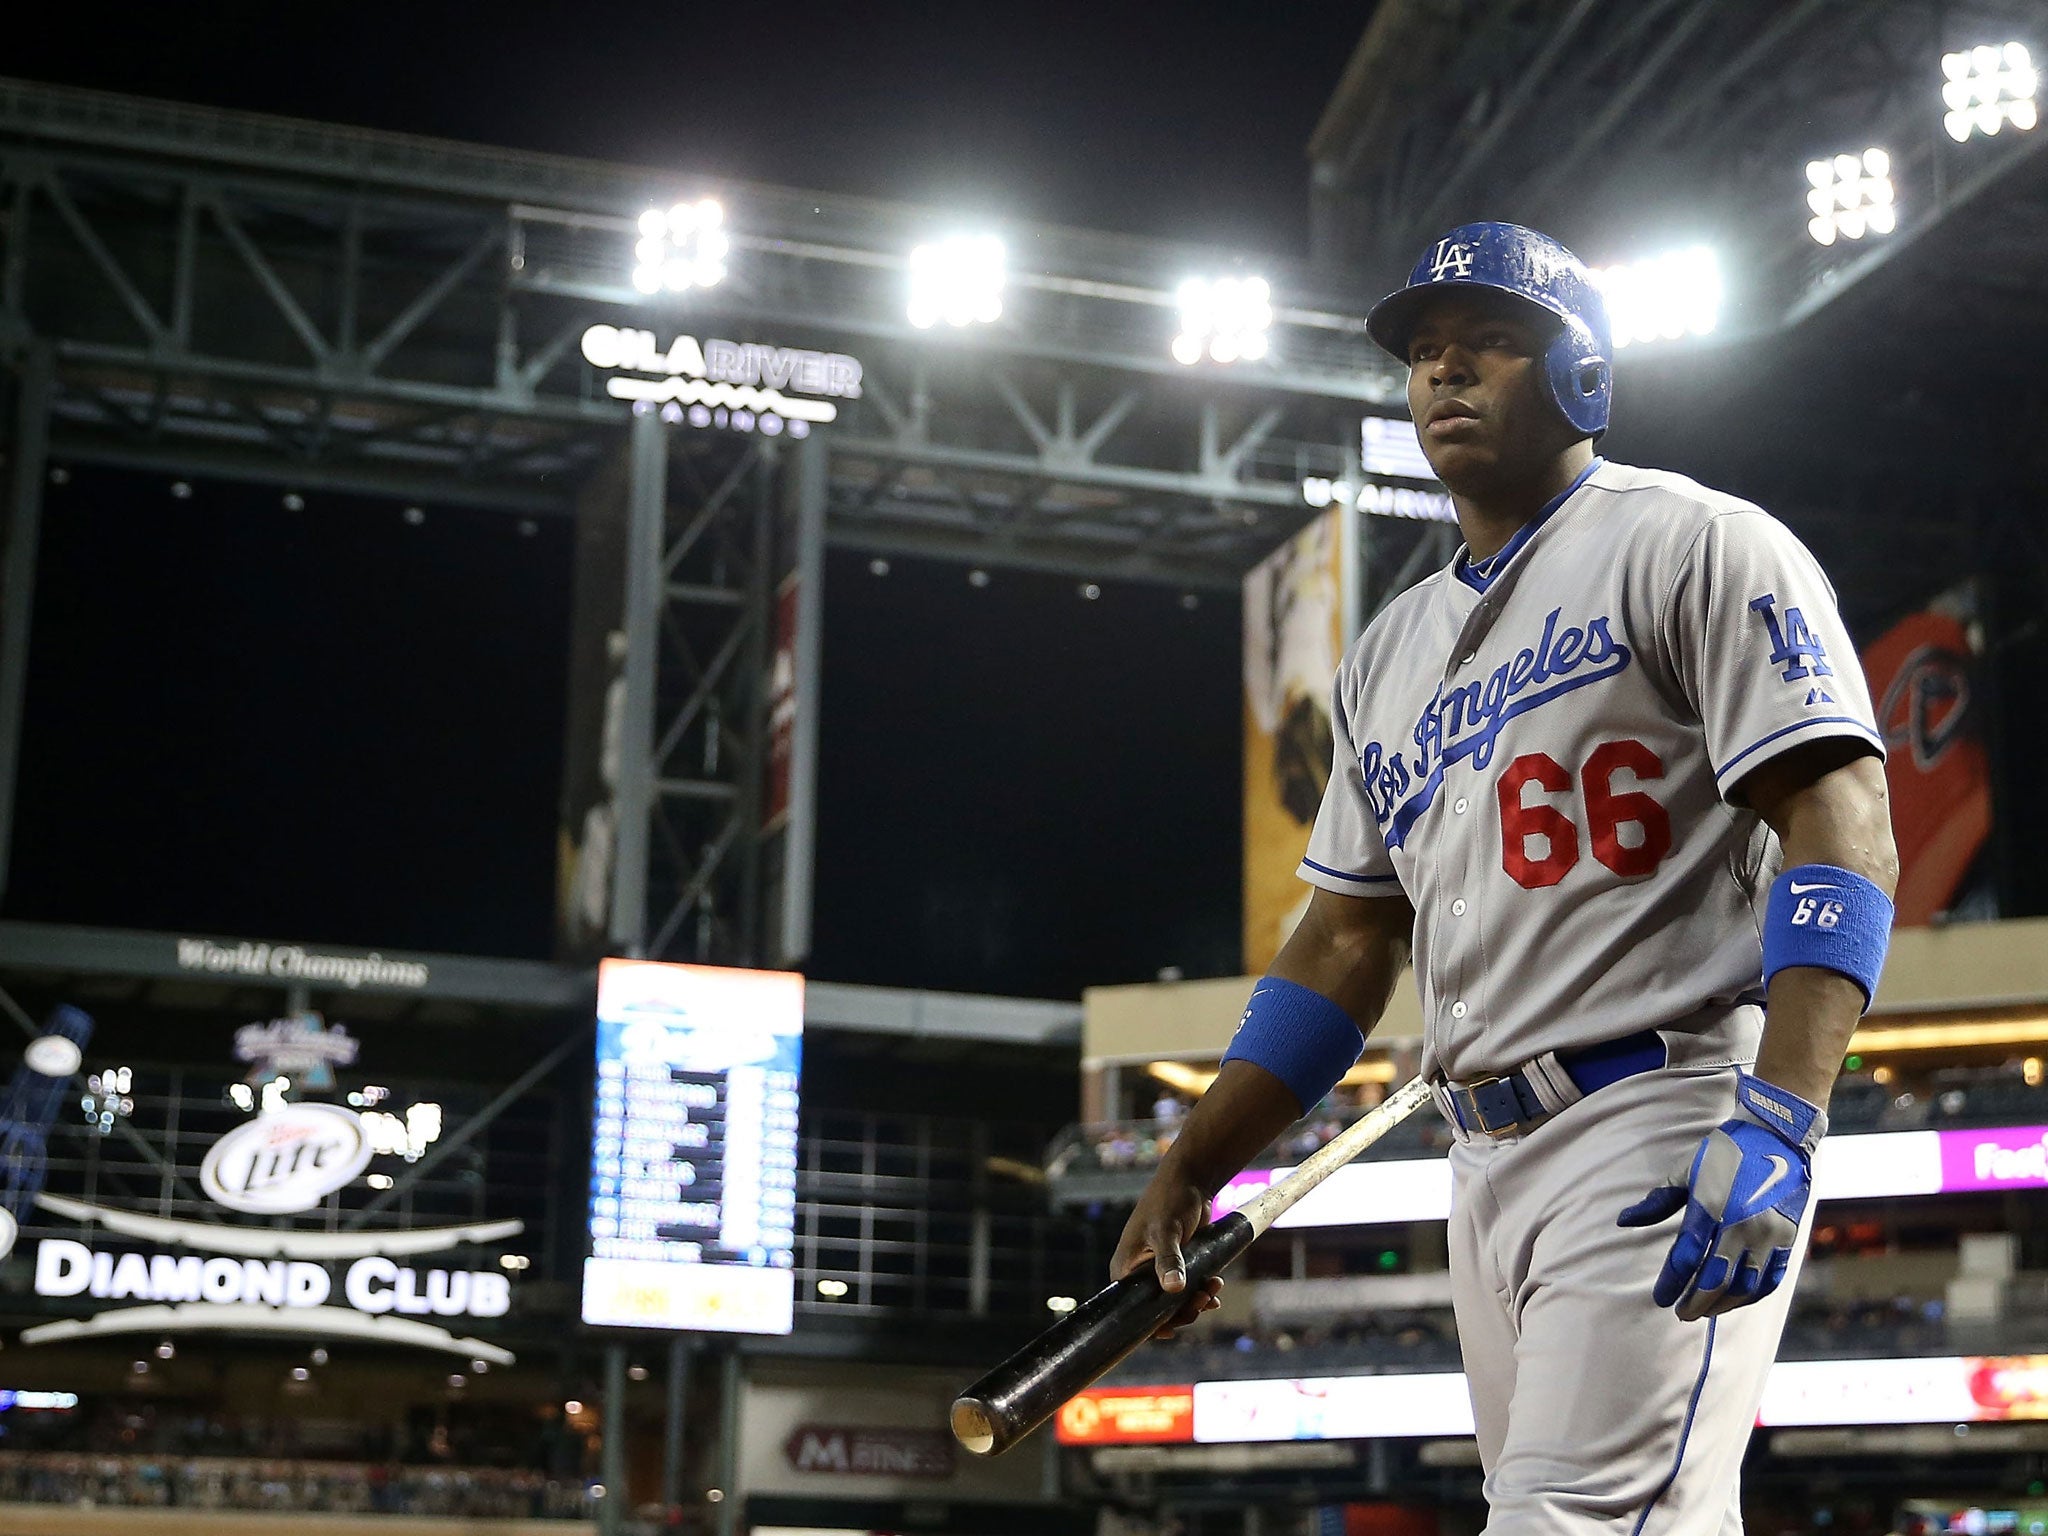 Yasiel Puig signed with the Los Angeles Dodgers in 2012